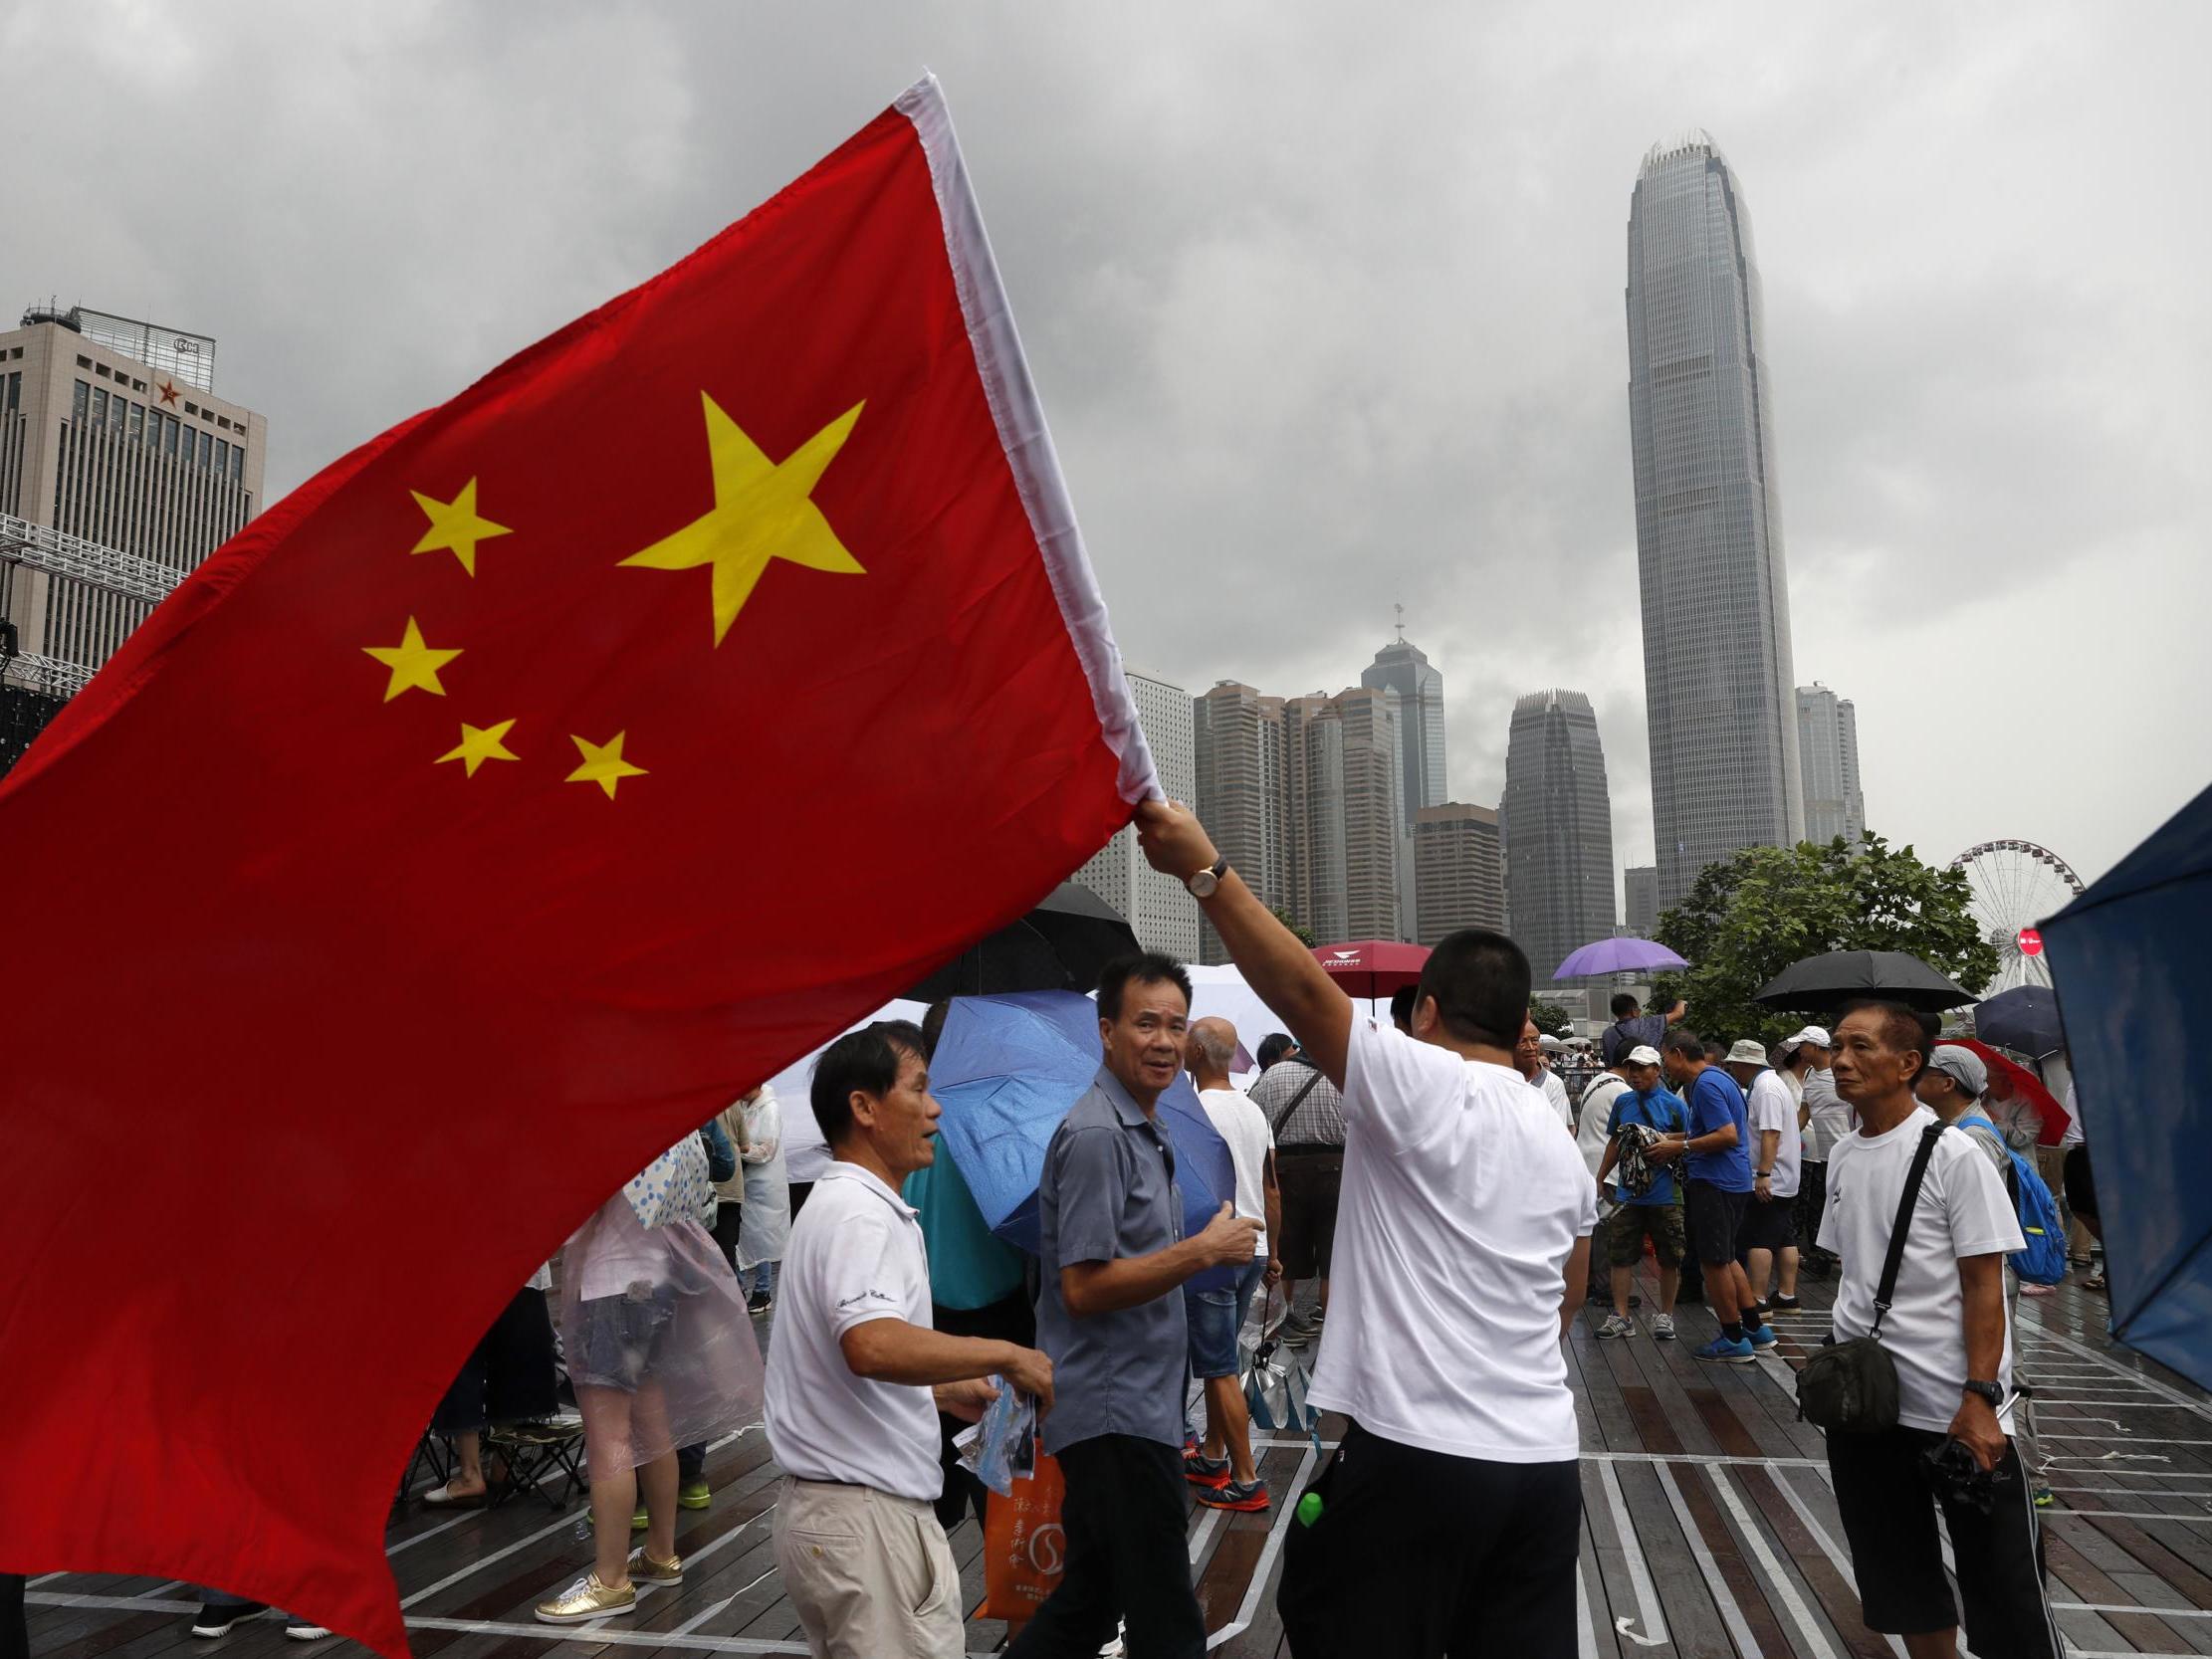 A pro-China supporter waves a Chinese national flag during a counter-rally in support of the police in Hong Kong on Saturday 20 July 2019.